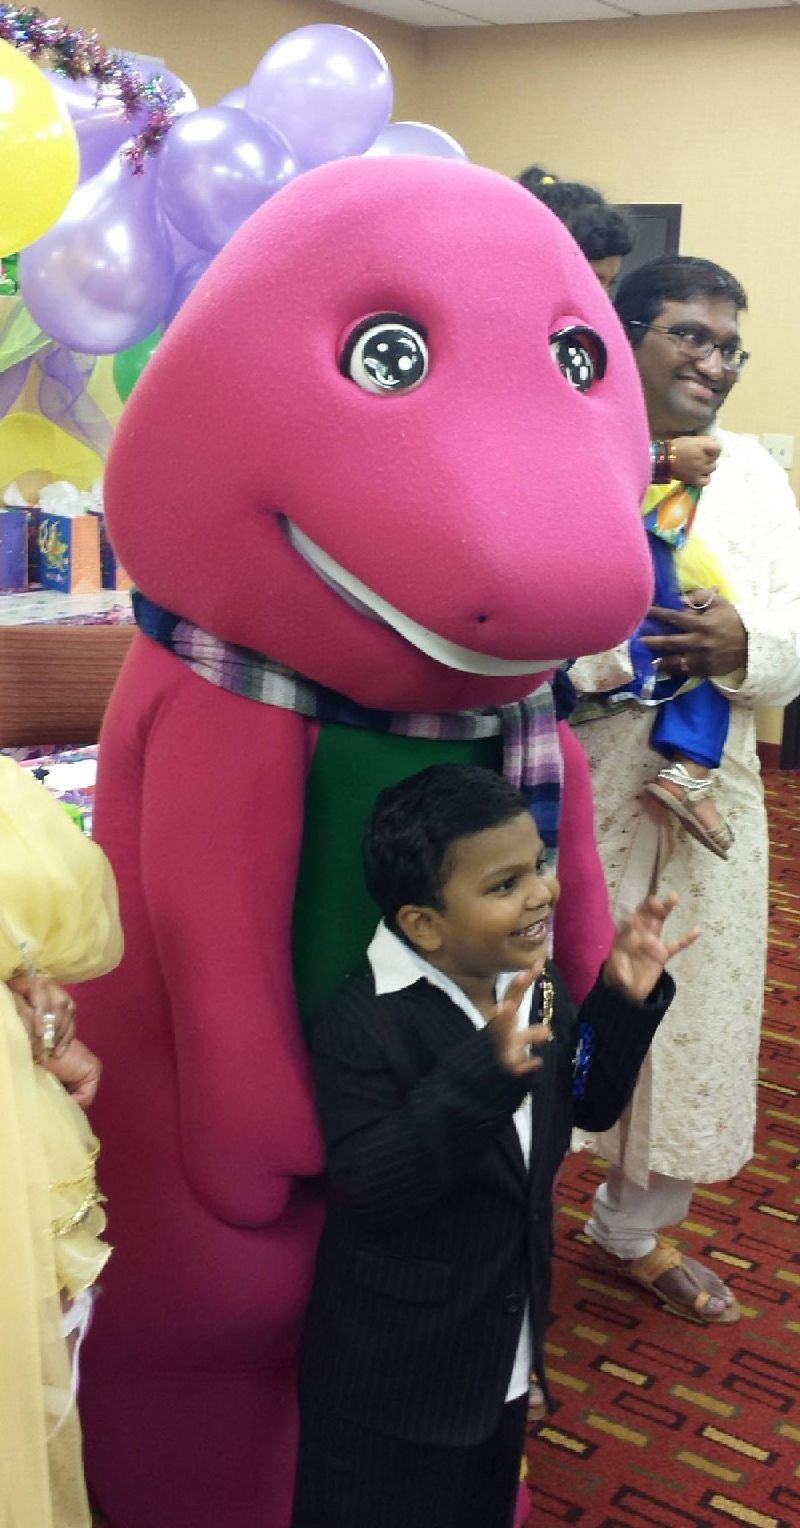 Purple dinosaur costumed character at birthday party in Cary